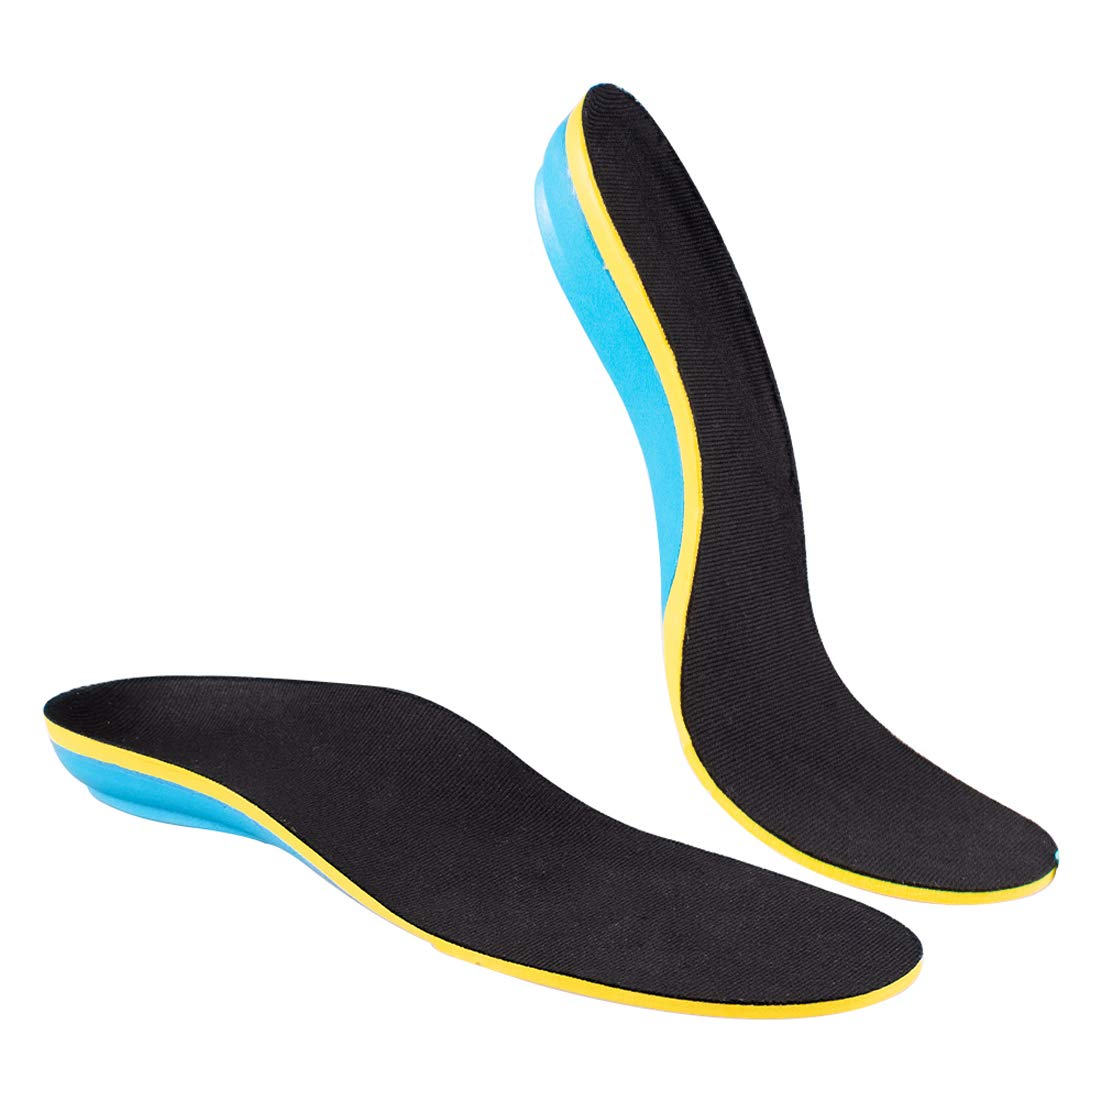 Curafoot Running Shoe Insoles For Flat Feet